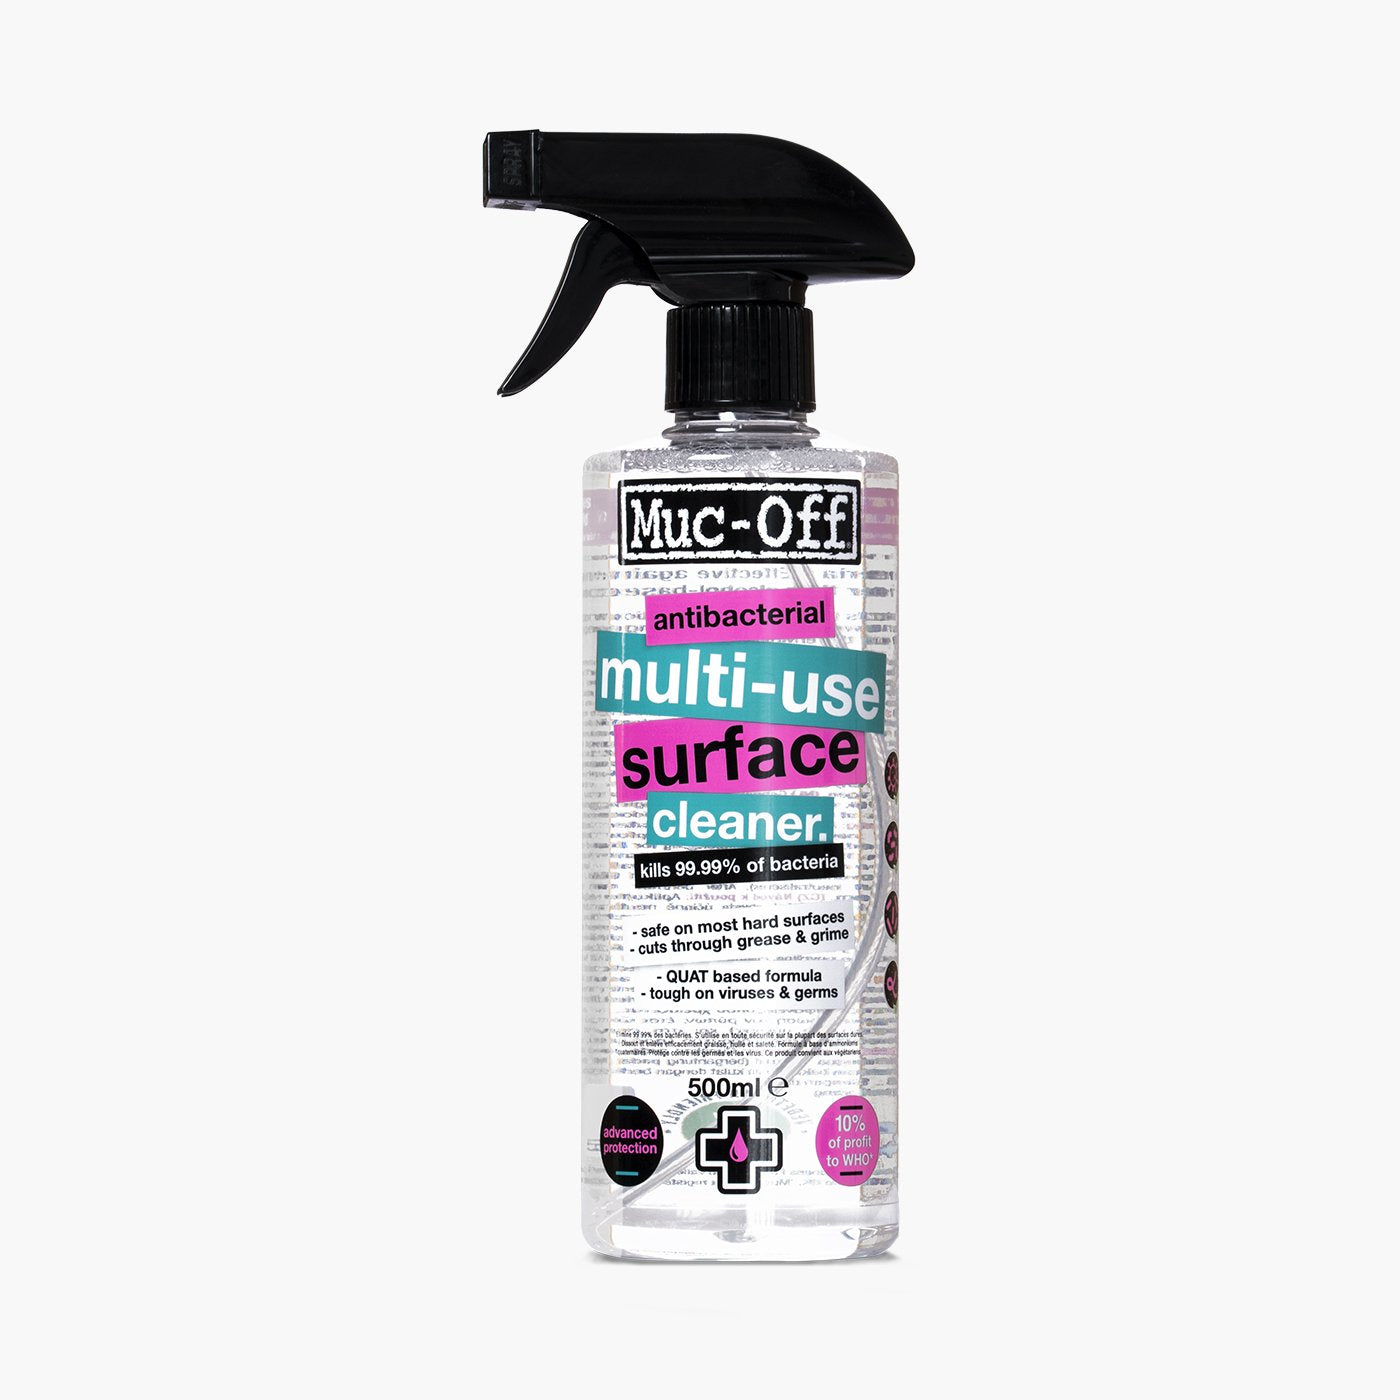 Photos - Bike Accessories Muc-Off Antibacterial Multi Use Surface Cleaner - 500ml 500 ml 20238 